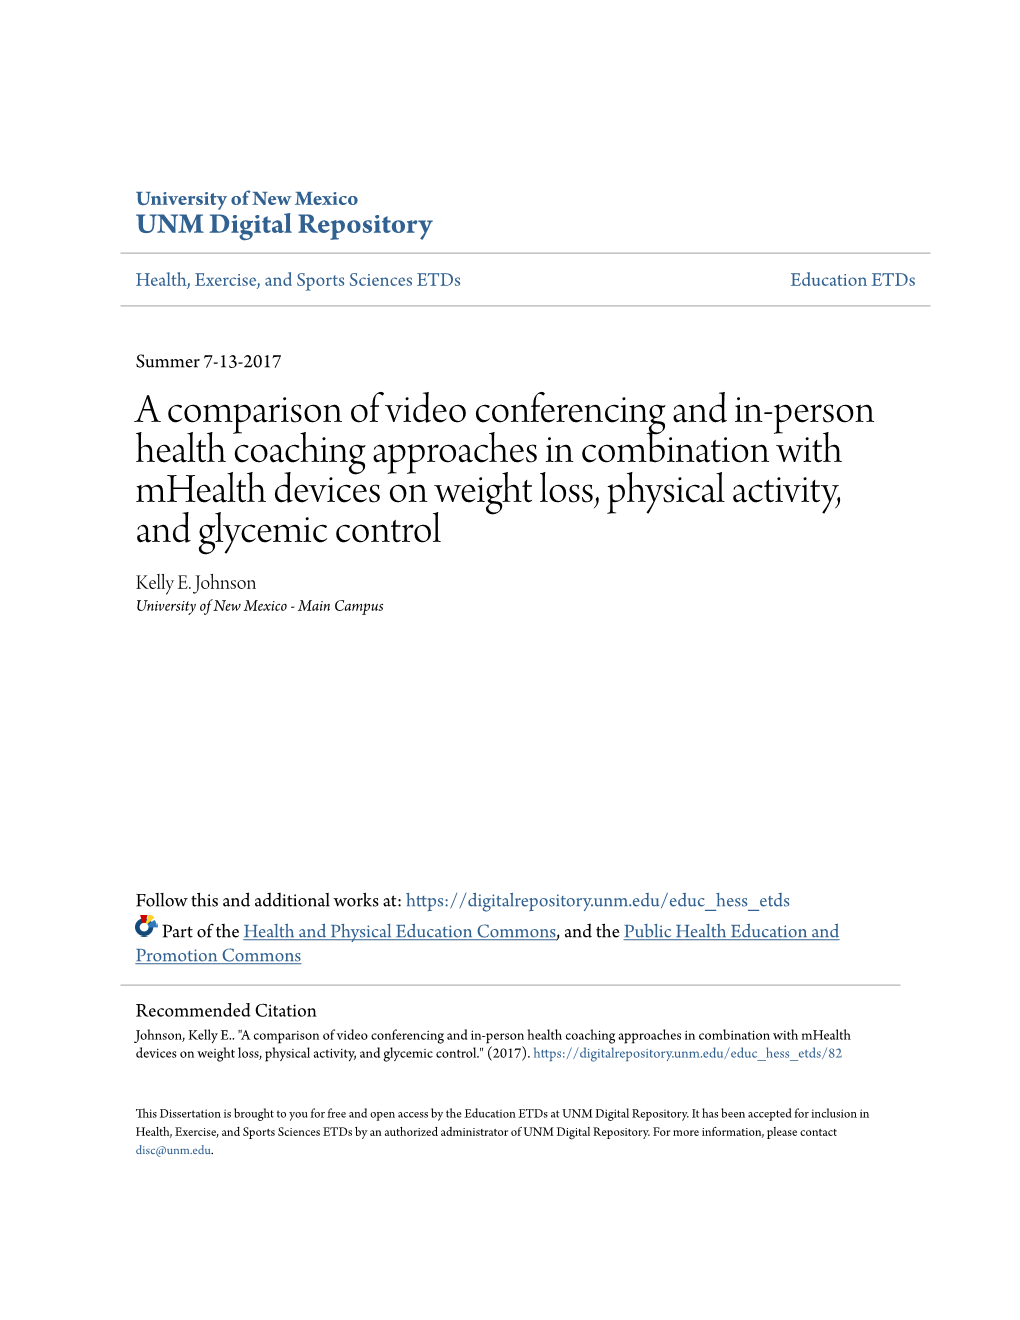 A Comparison of Video Conferencing and In-Person Health Coaching Approaches in Combination with Mhealth Devices on Weight Loss